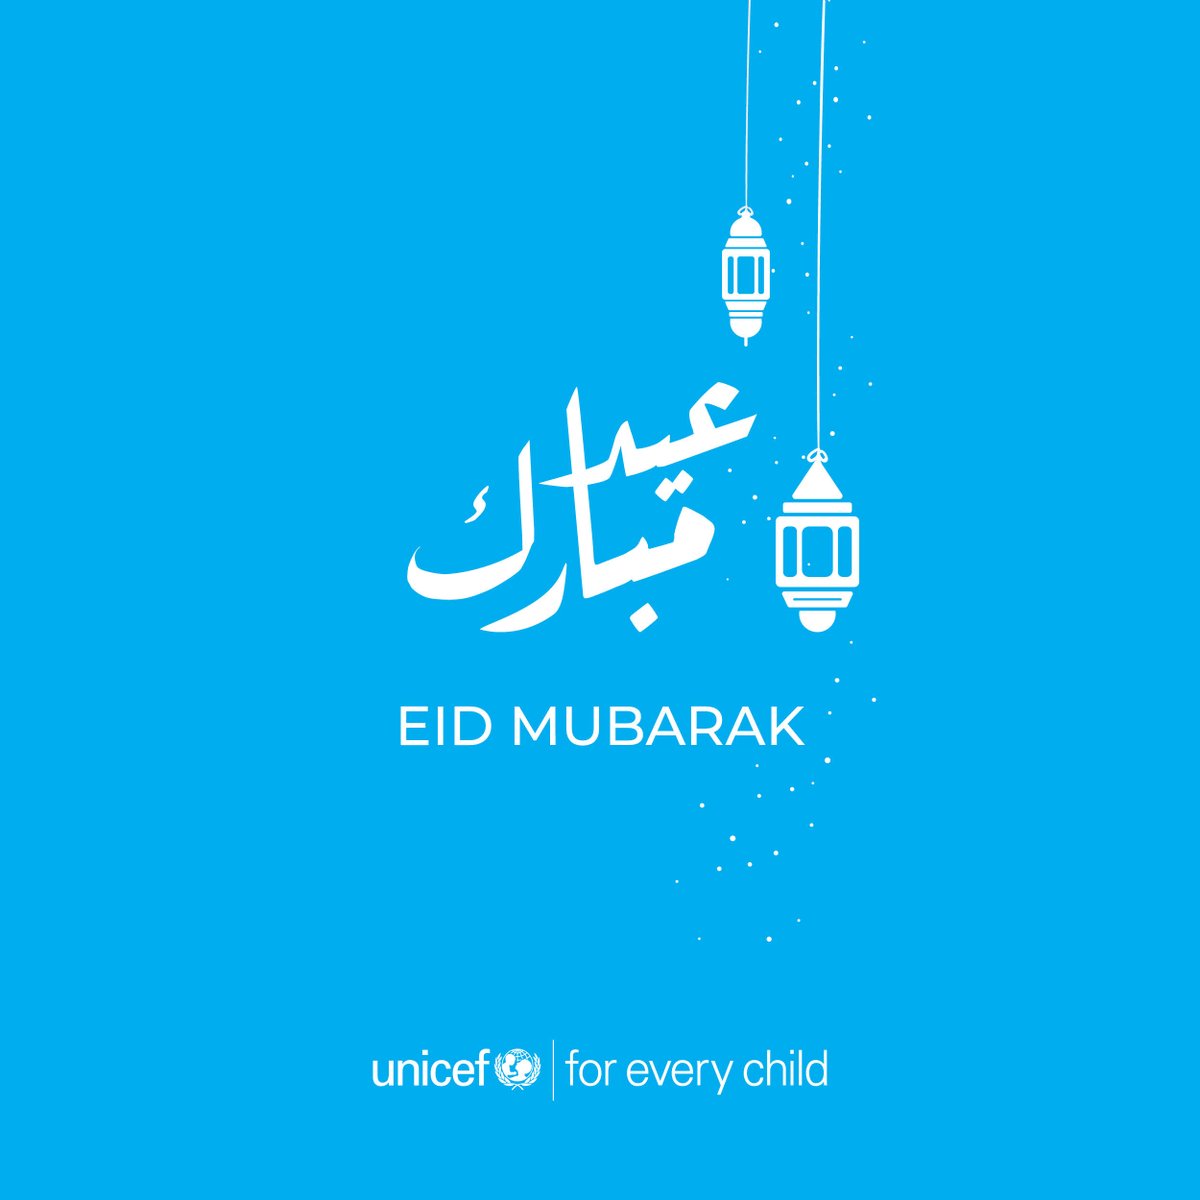 Eid Mubarak! During these tough times in the region, we wish for children's safety, peace, and better days ahead #ForEveryChild.